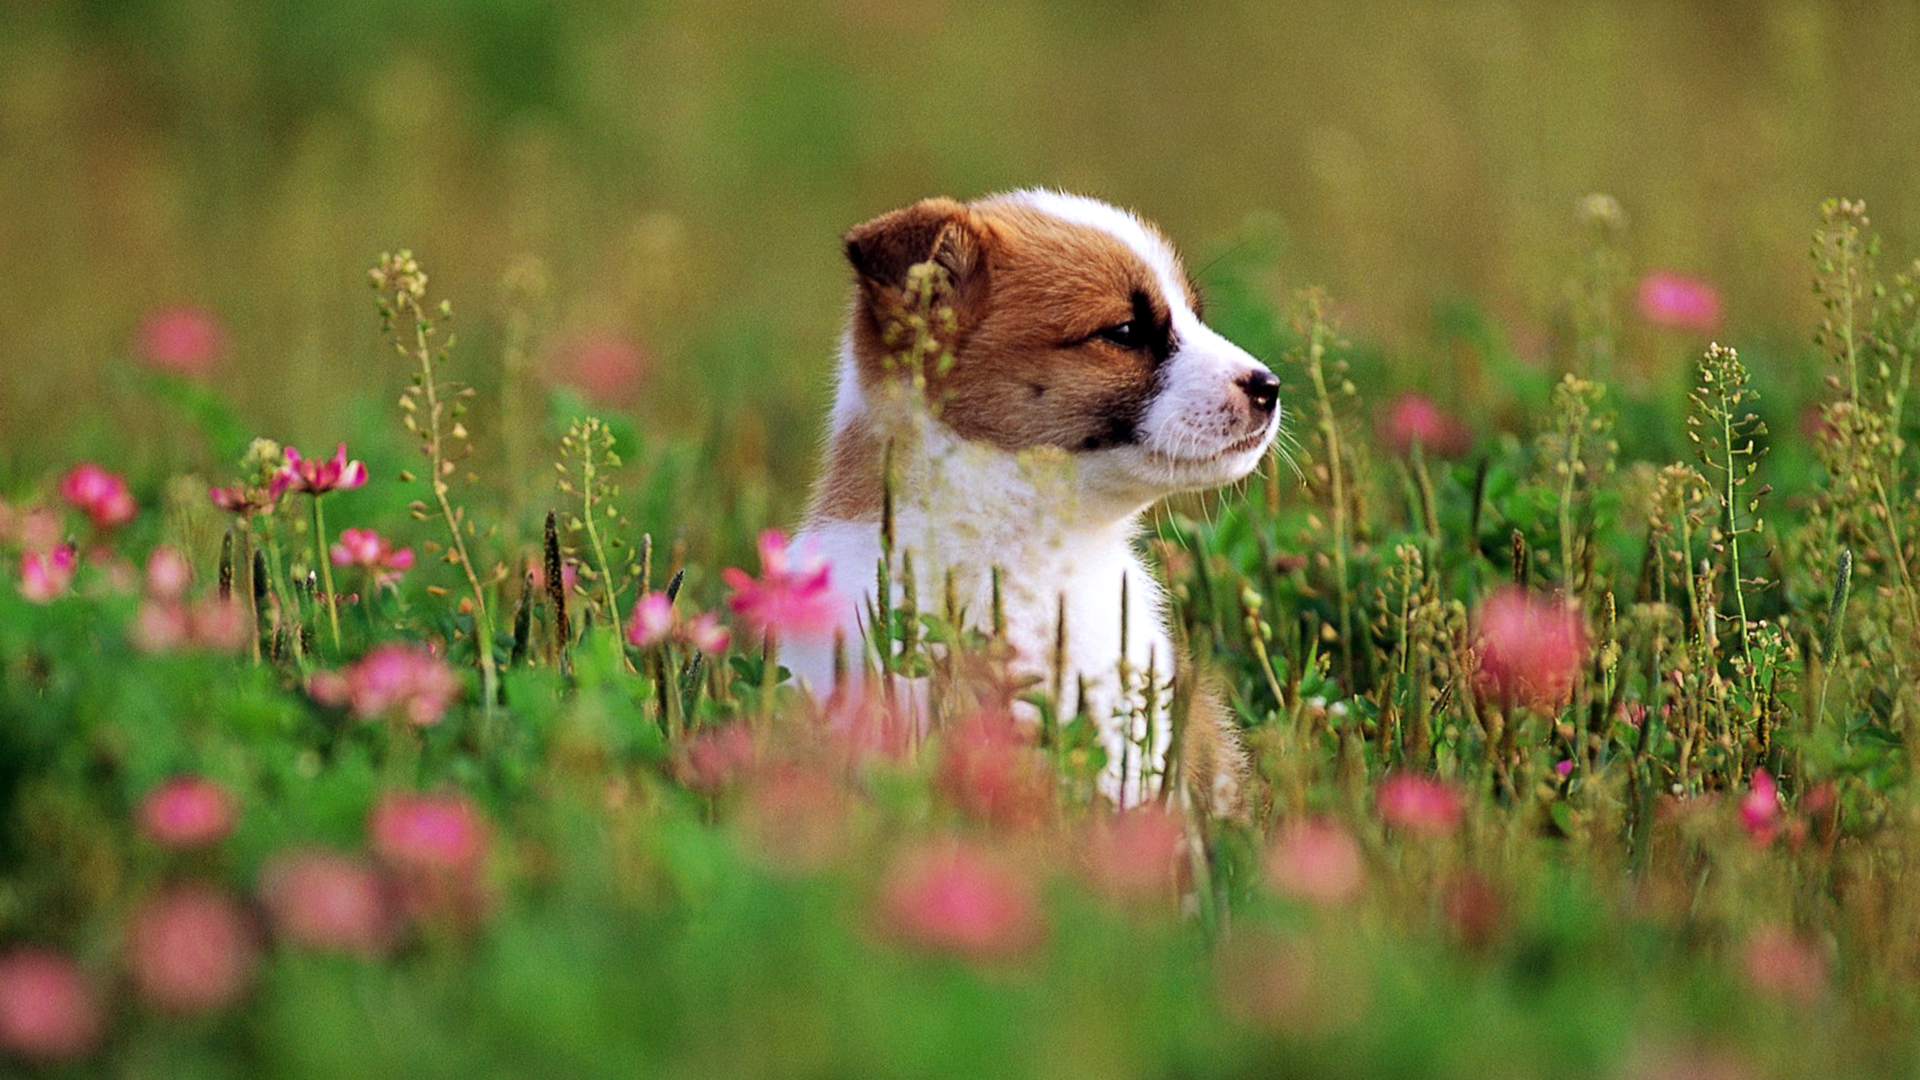 Cute Puppy Wallpapers Free Download - Free Download Cute Puppy ...